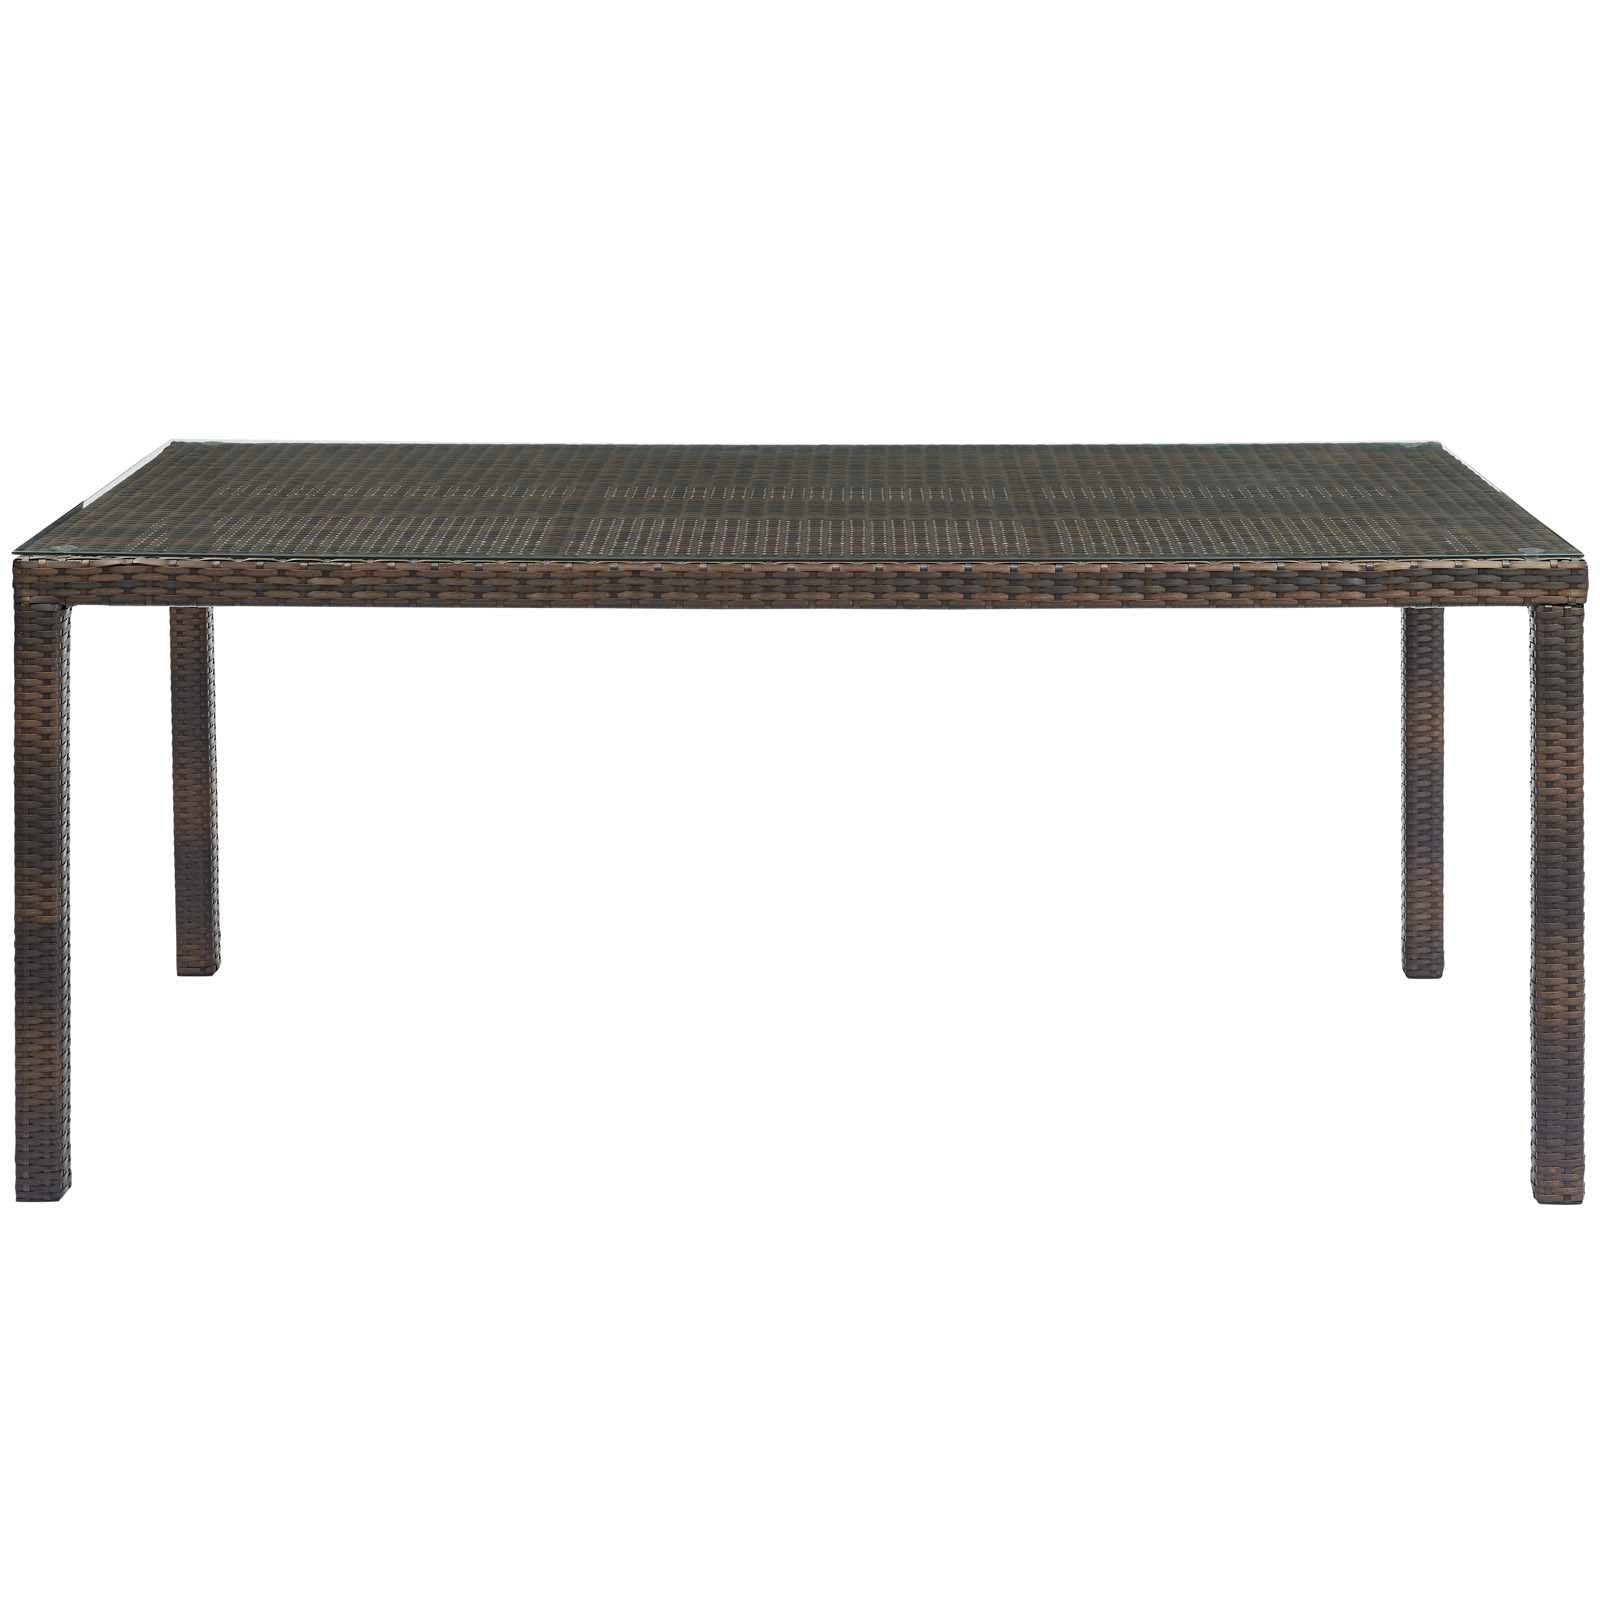 Conduit 70" Outdoor Patio Wicker Rattan Dining Table - East Shore Modern Home Furnishings